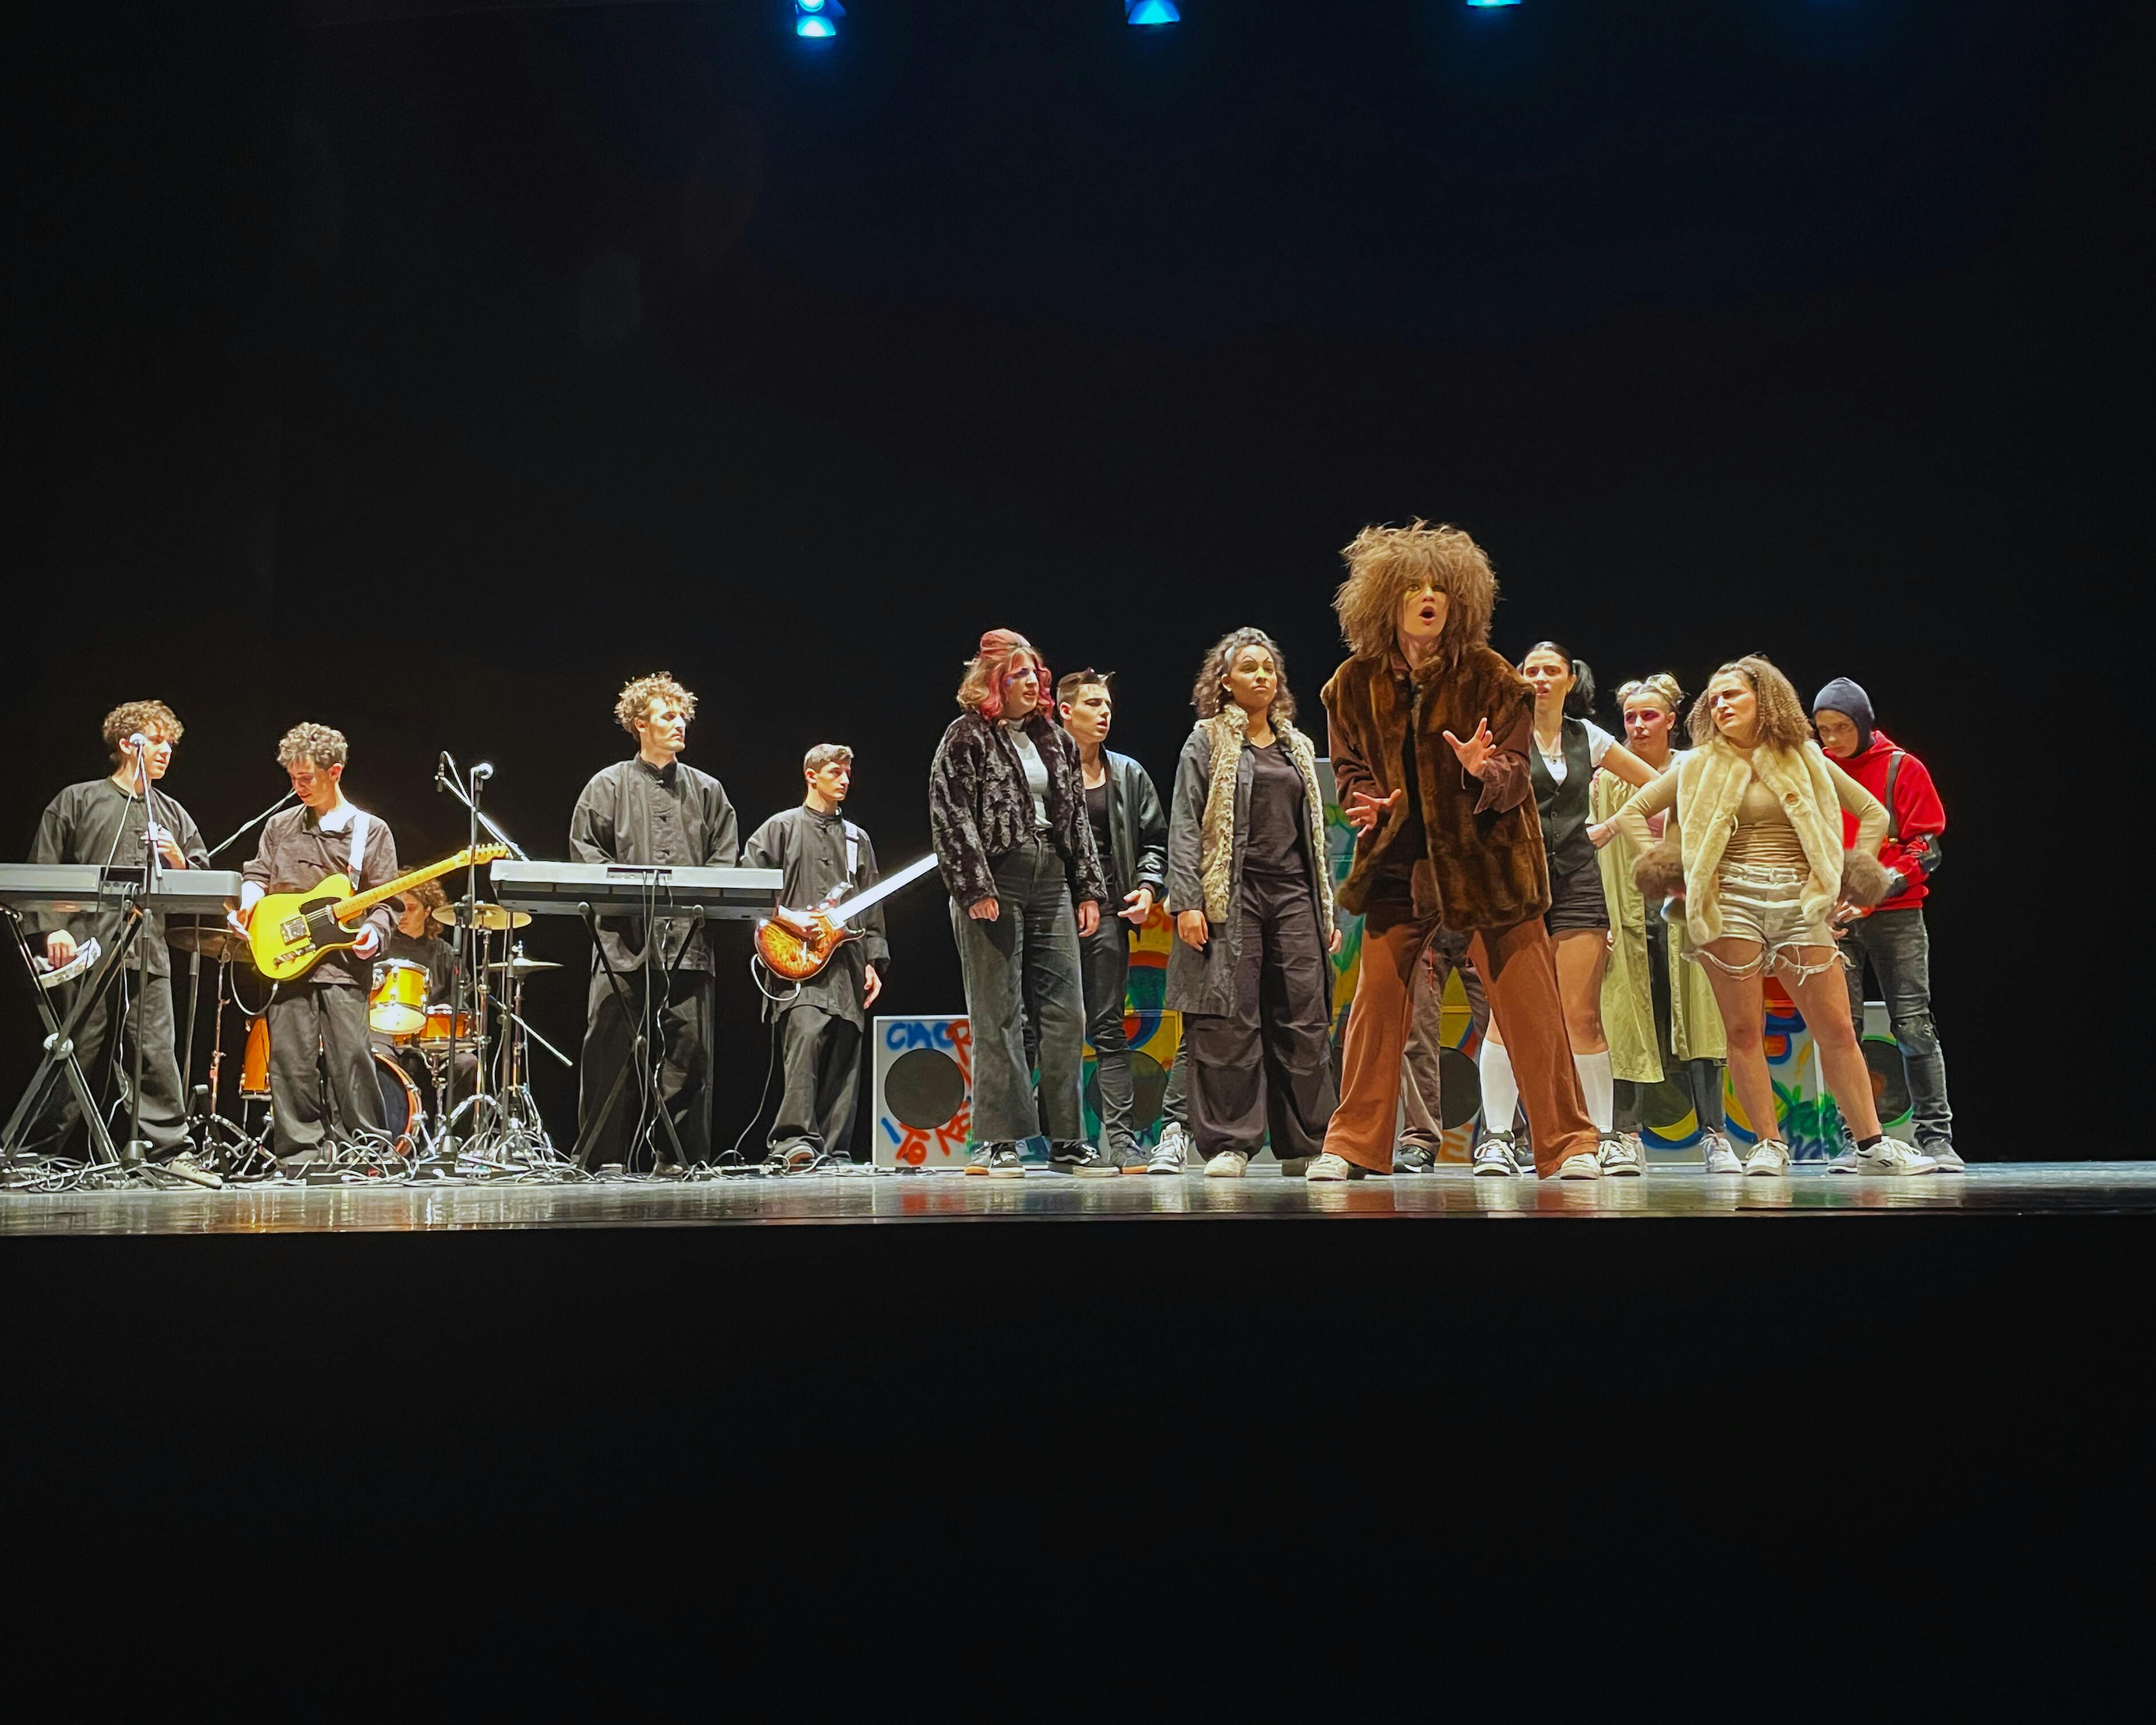 Boys and girls on stage in costumes reminiscent of animals and a band playing